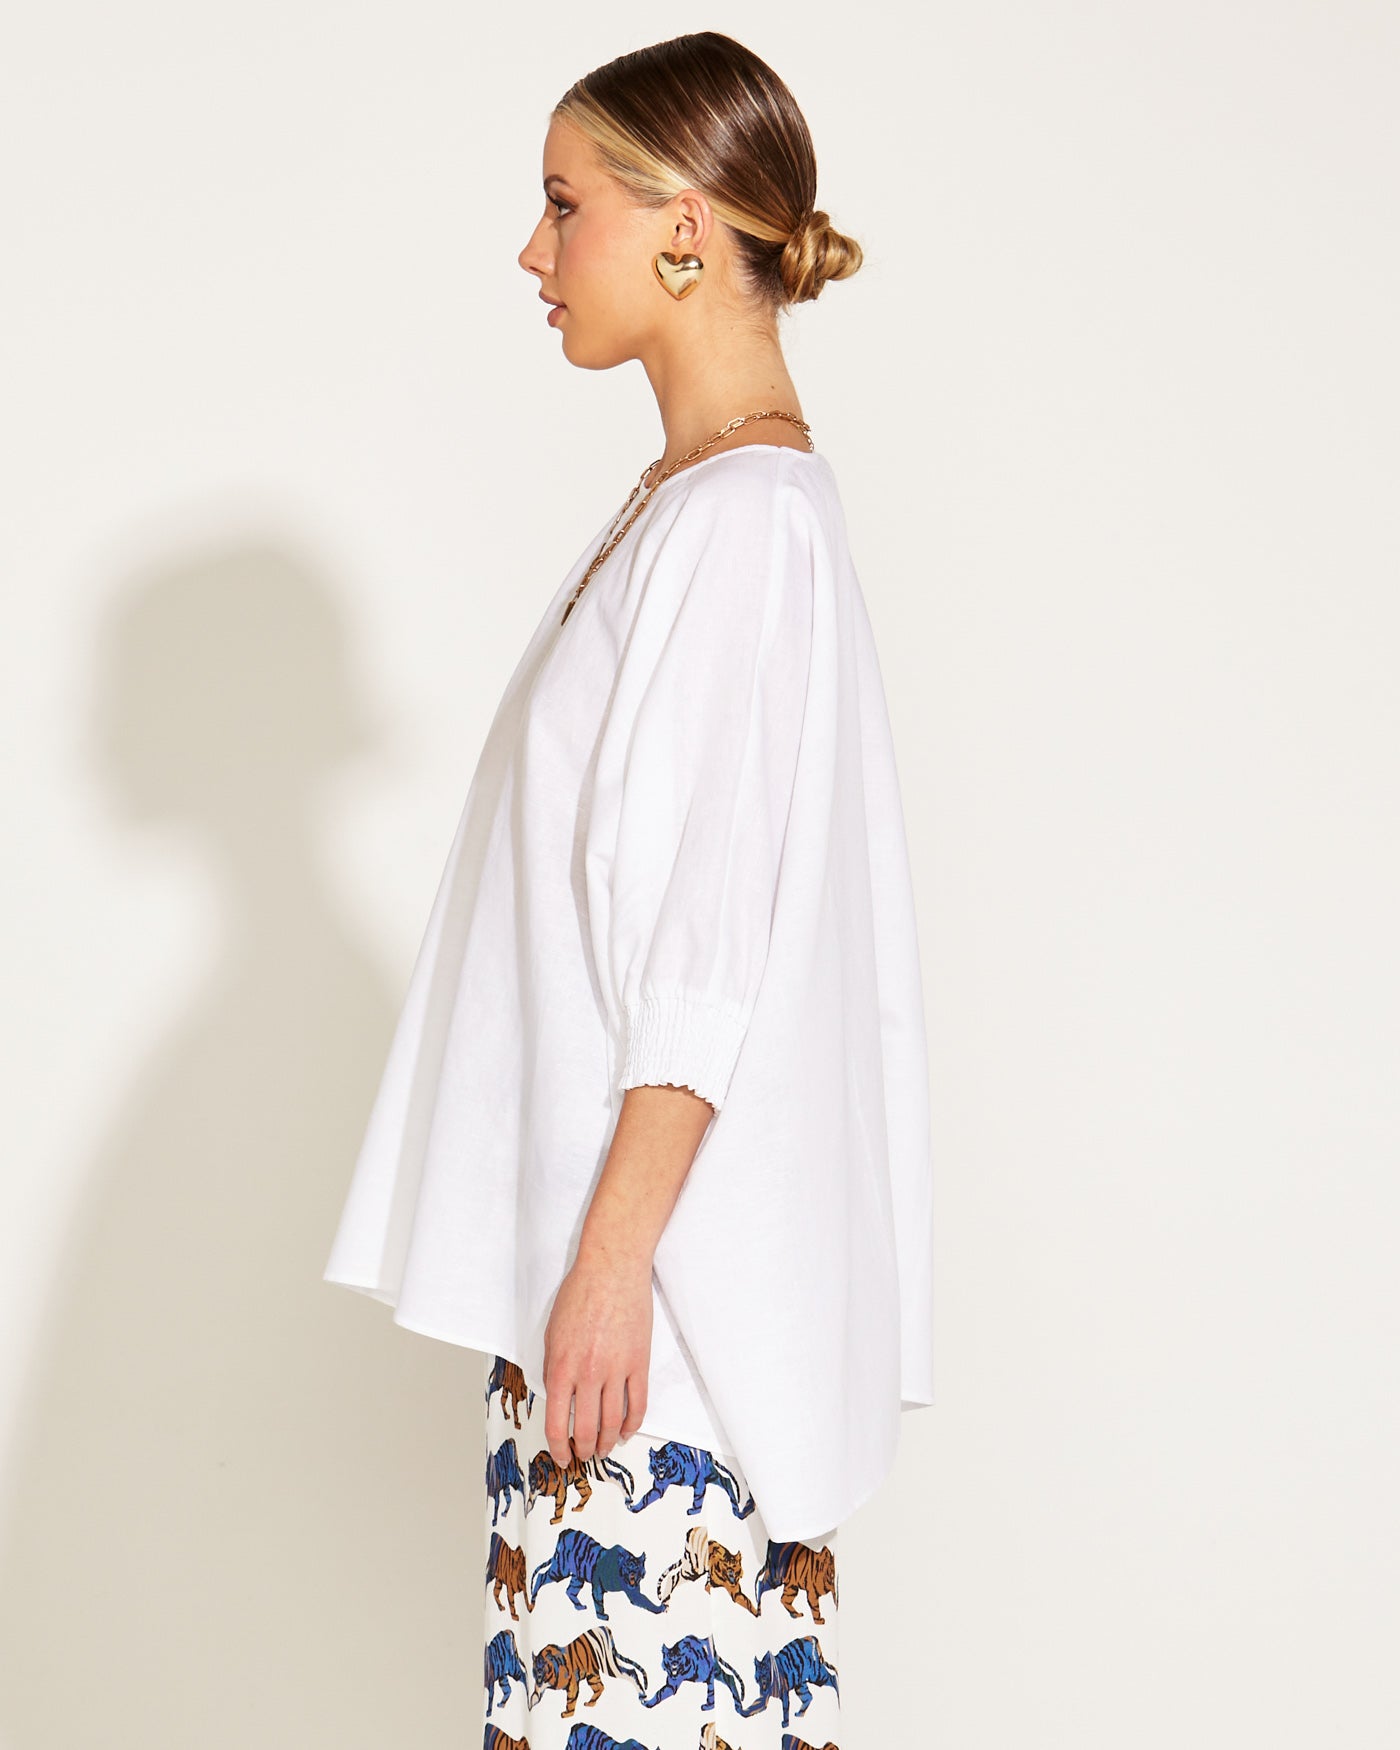 Fate+Becker A Walk In The Park Linen Oversized Batwing Top - White